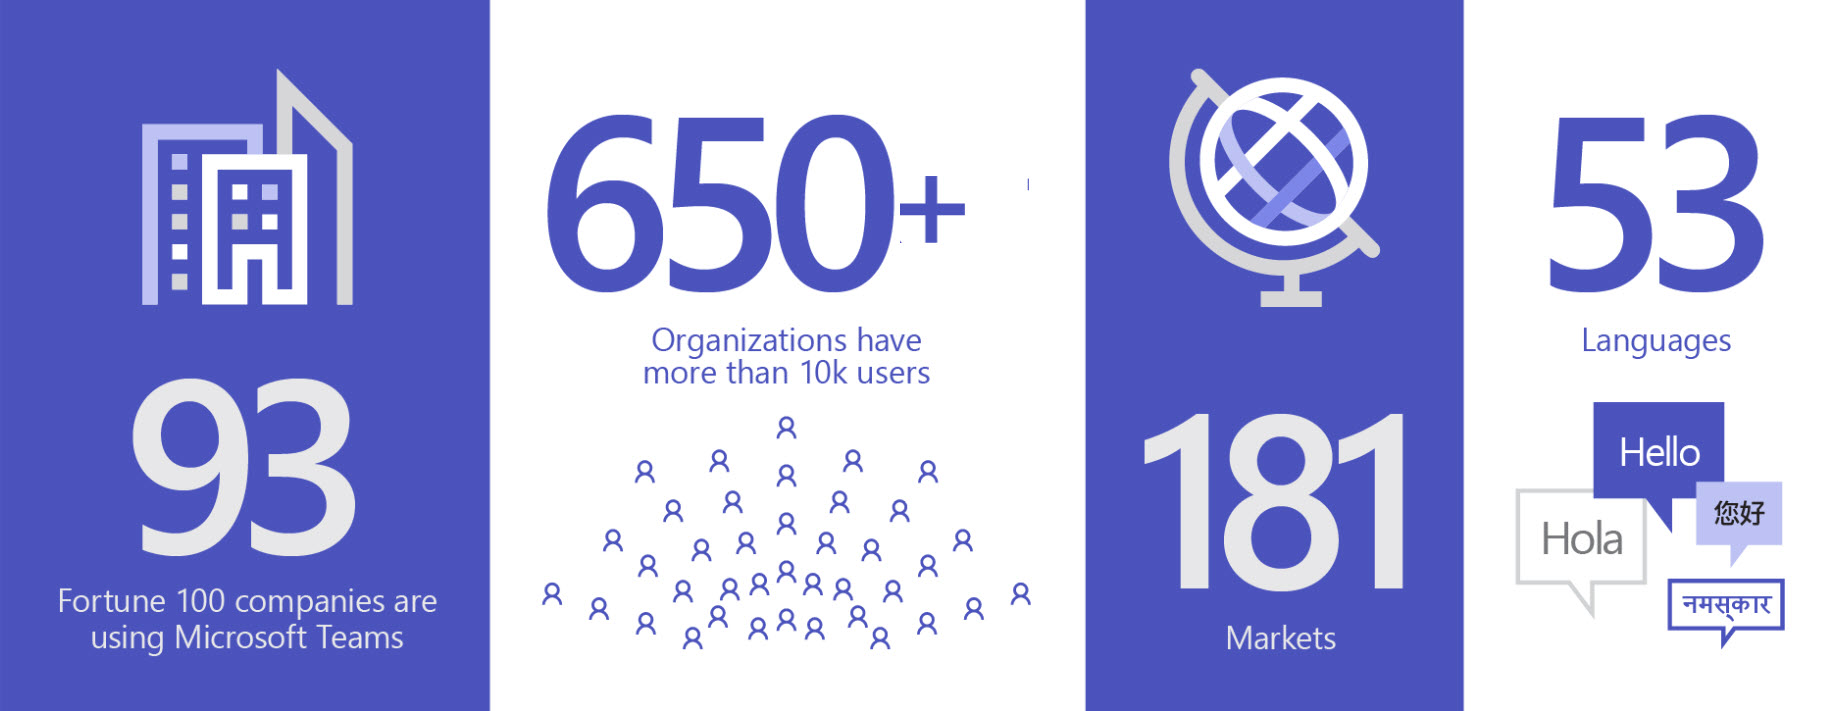 Image showing 93 organizations using Teams, 650+ organizations have more than 10K users, in 181 markets, and 53 languages.